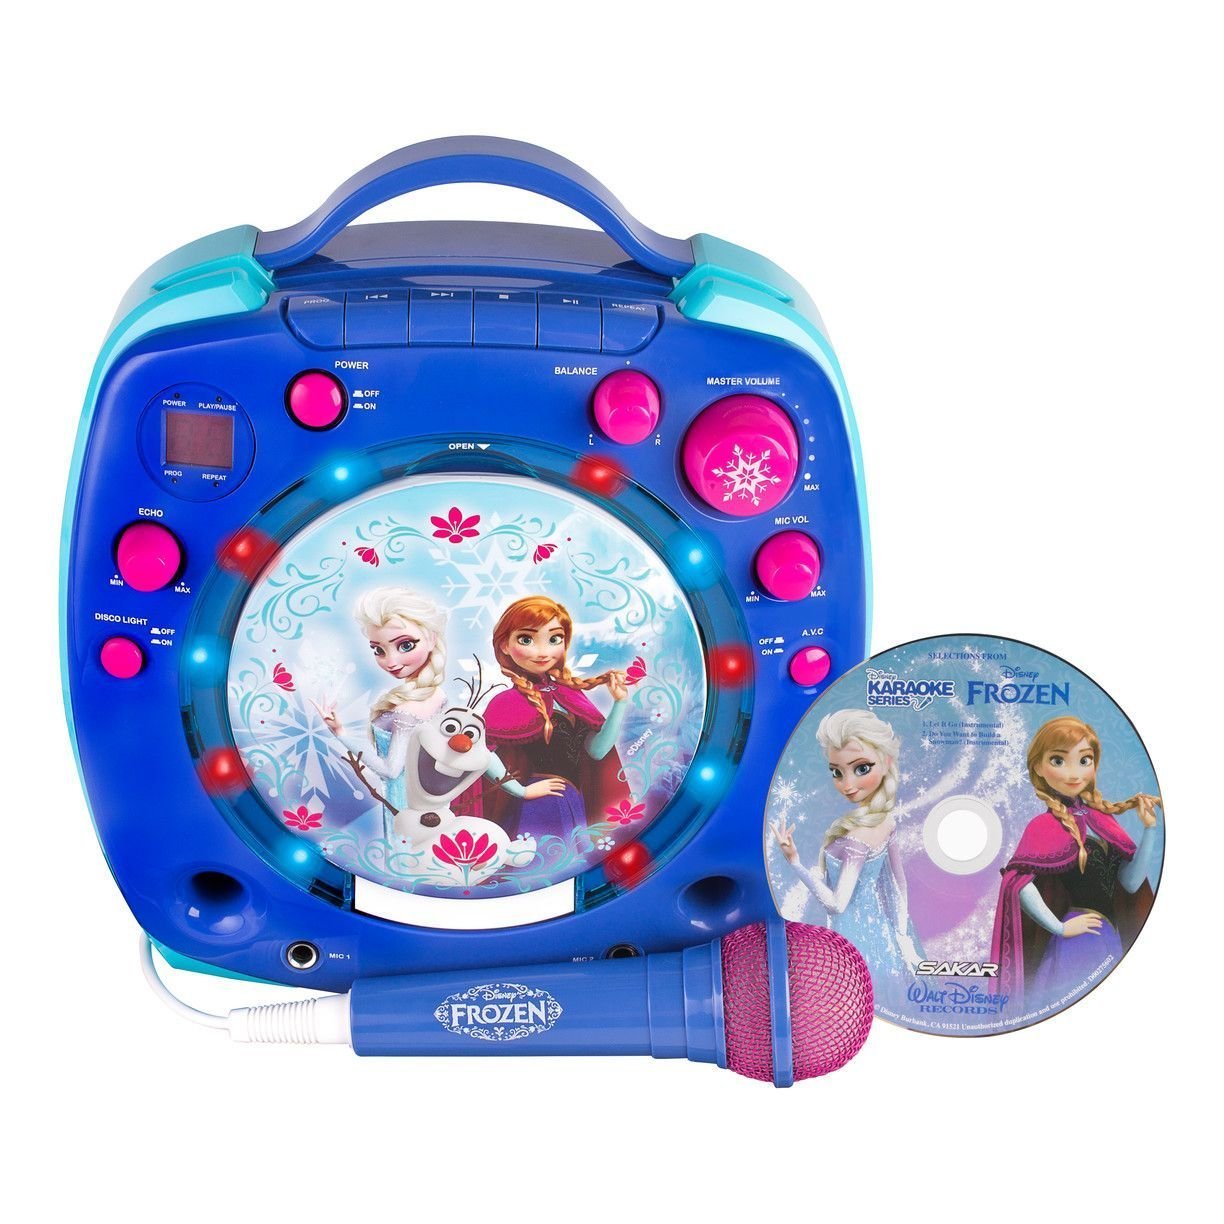 gifts for girls, christmas gifts for girls, toys for girls, christmas gifts, gifts, gift ideas, frozen, frozen karaoke machine, kids karaoke machine